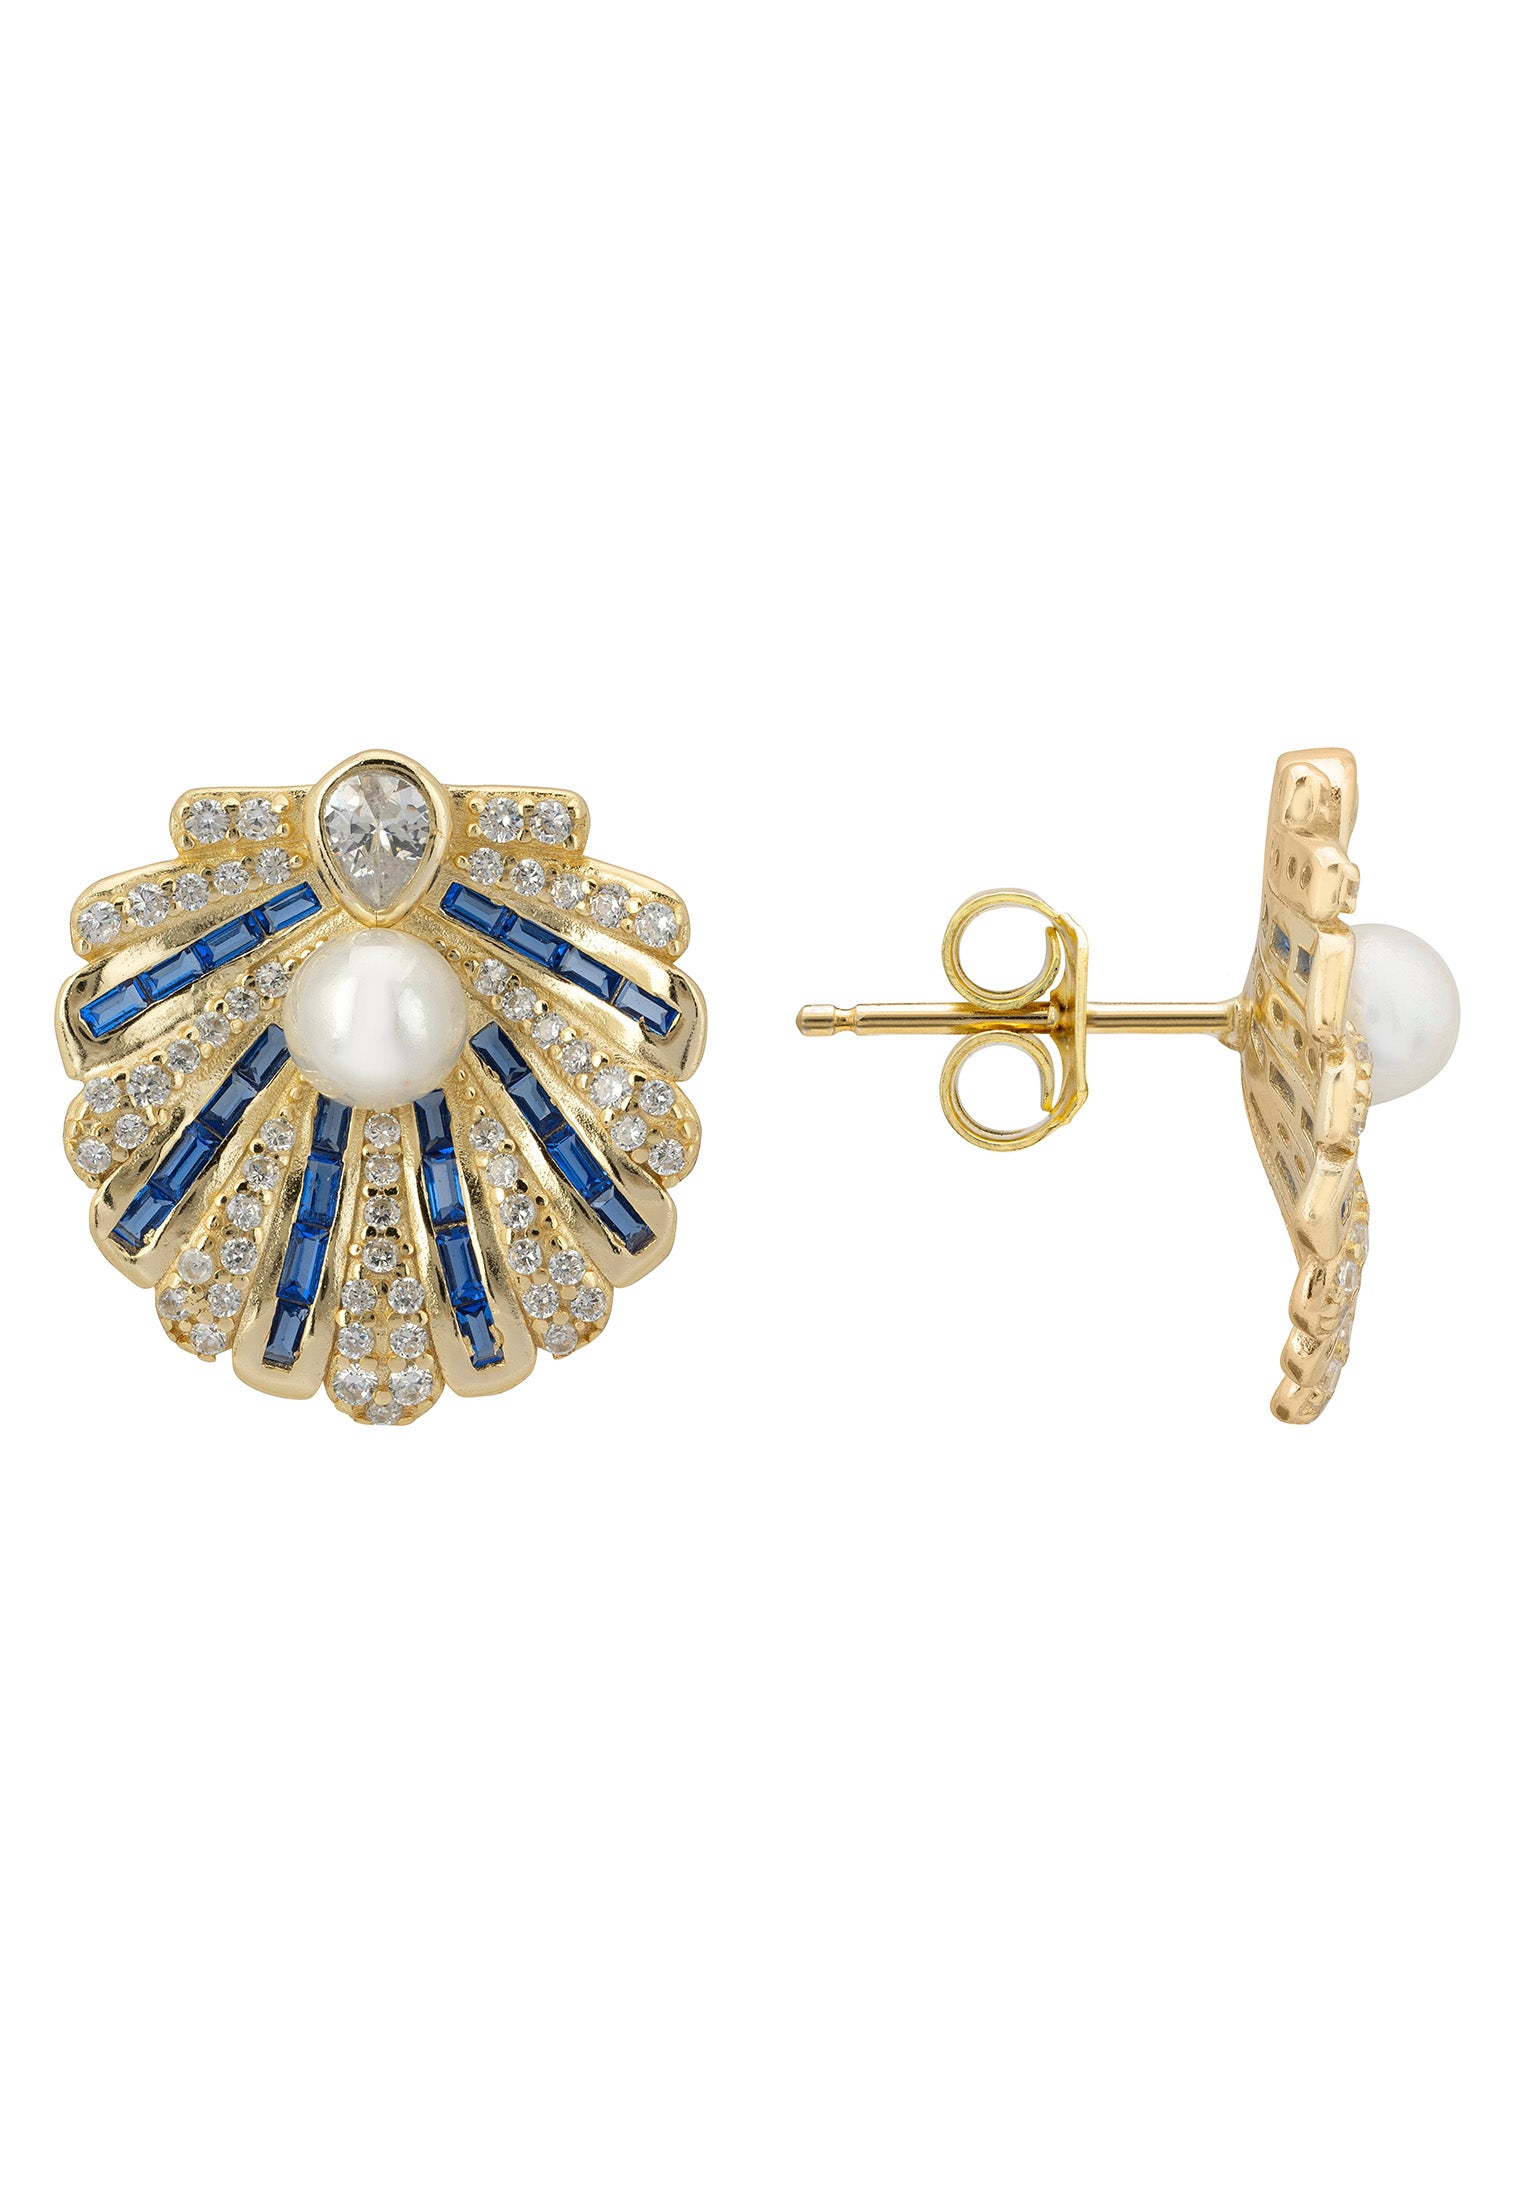 Art Deco Scallop Shell Earrings Sapphire Blue With Pearl Gold